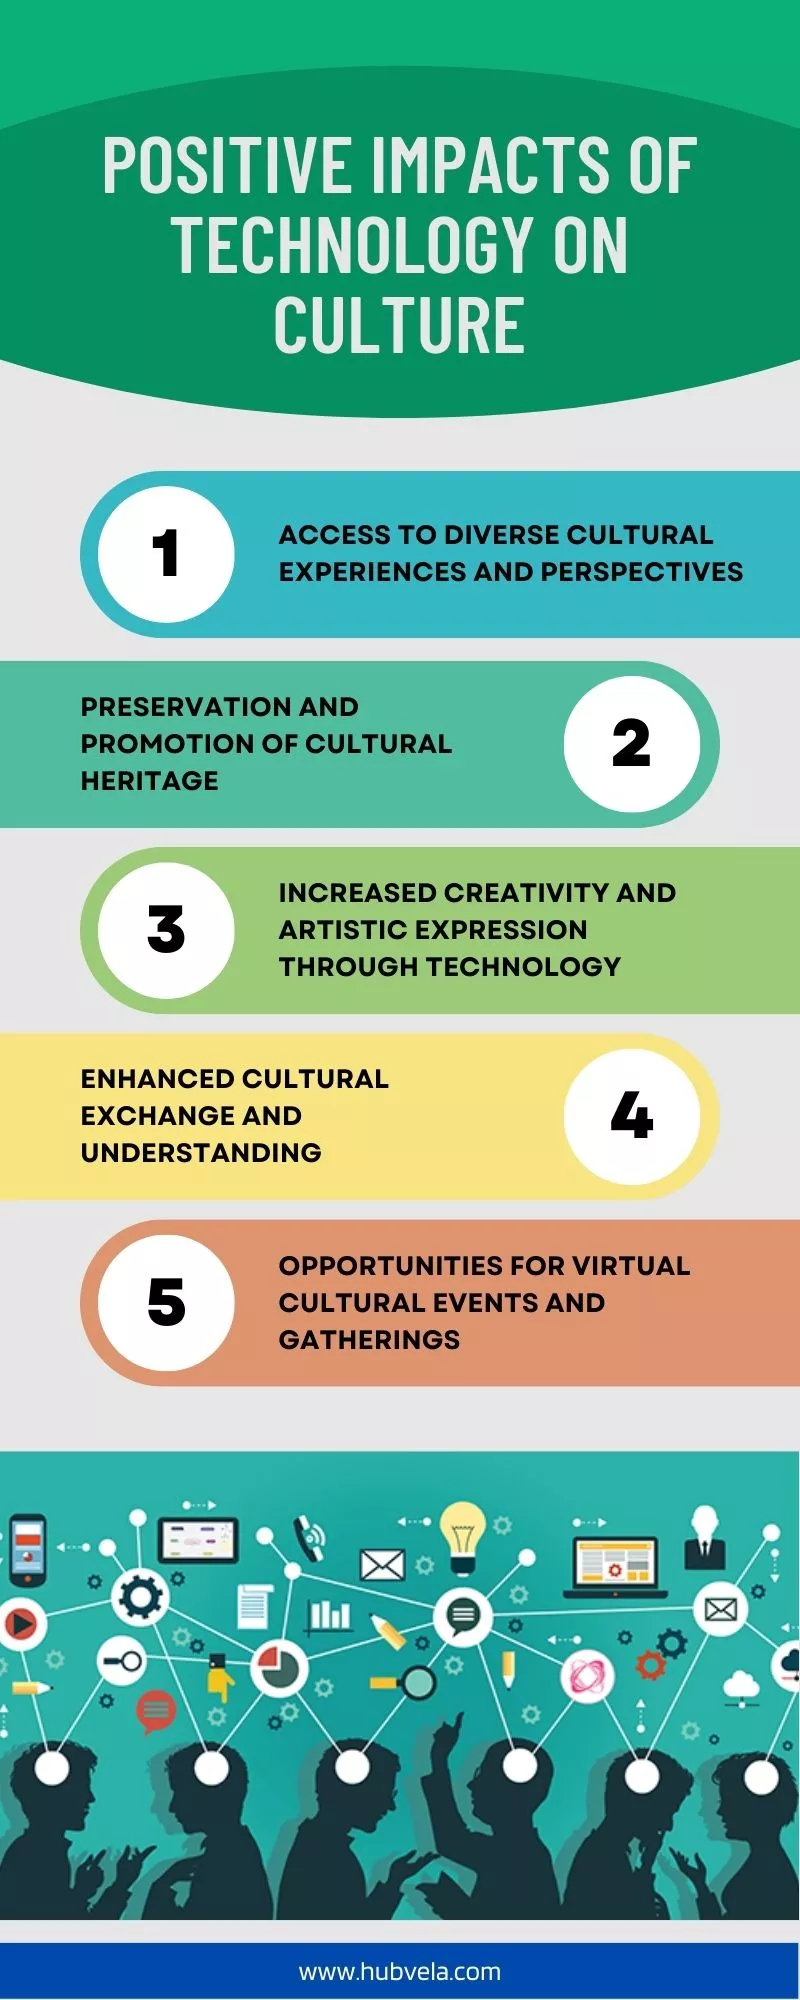 Positive Impacts of Technology on Culture infographic